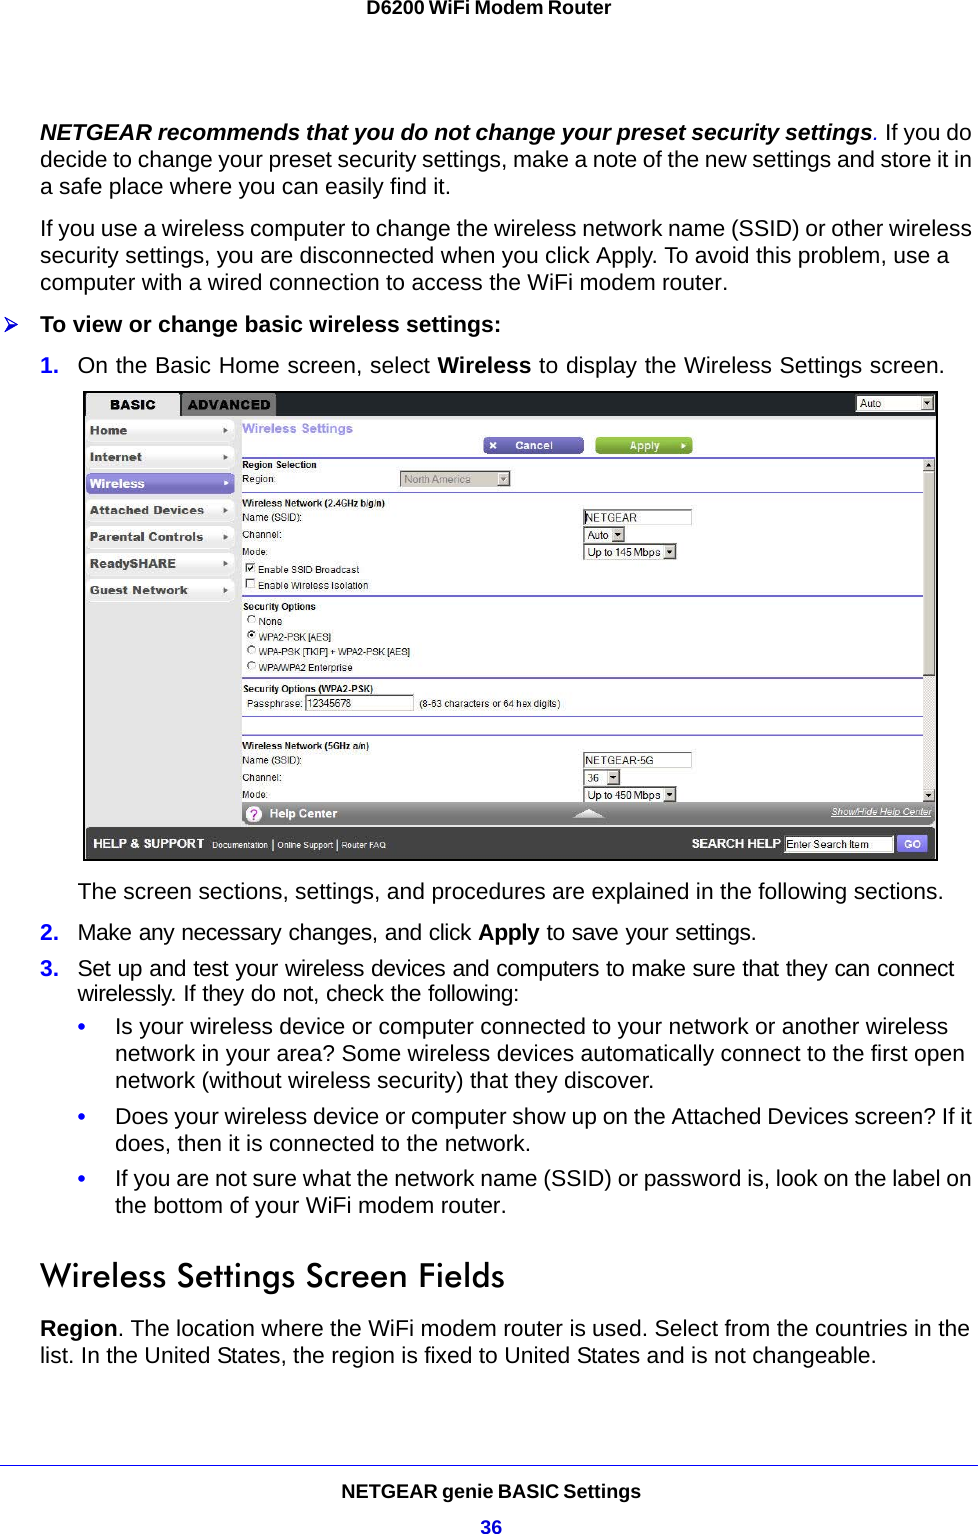 NETGEAR genie BASIC Settings36D6200 WiFi Modem Router NETGEAR recommends that you do not change your preset security settings. If you do decide to change your preset security settings, make a note of the new settings and store it in a safe place where you can easily find it.If you use a wireless computer to change the wireless network name (SSID) or other wireless security settings, you are disconnected when you click Apply. To avoid this problem, use a computer with a wired connection to access the WiFi modem router.To view or change basic wireless settings:1. On the Basic Home screen, select Wireless to display the Wireless Settings screen. The screen sections, settings, and procedures are explained in the following sections.2. Make any necessary changes, and click Apply to save your settings.3. Set up and test your wireless devices and computers to make sure that they can connect wirelessly. If they do not, check the following:•Is your wireless device or computer connected to your network or another wireless network in your area? Some wireless devices automatically connect to the first open network (without wireless security) that they discover.•Does your wireless device or computer show up on the Attached Devices screen? If it does, then it is connected to the network.•If you are not sure what the network name (SSID) or password is, look on the label on the bottom of your WiFi modem router.Wireless Settings Screen FieldsRegion. The location where the WiFi modem router is used. Select from the countries in the list. In the United States, the region is fixed to United States and is not changeable.